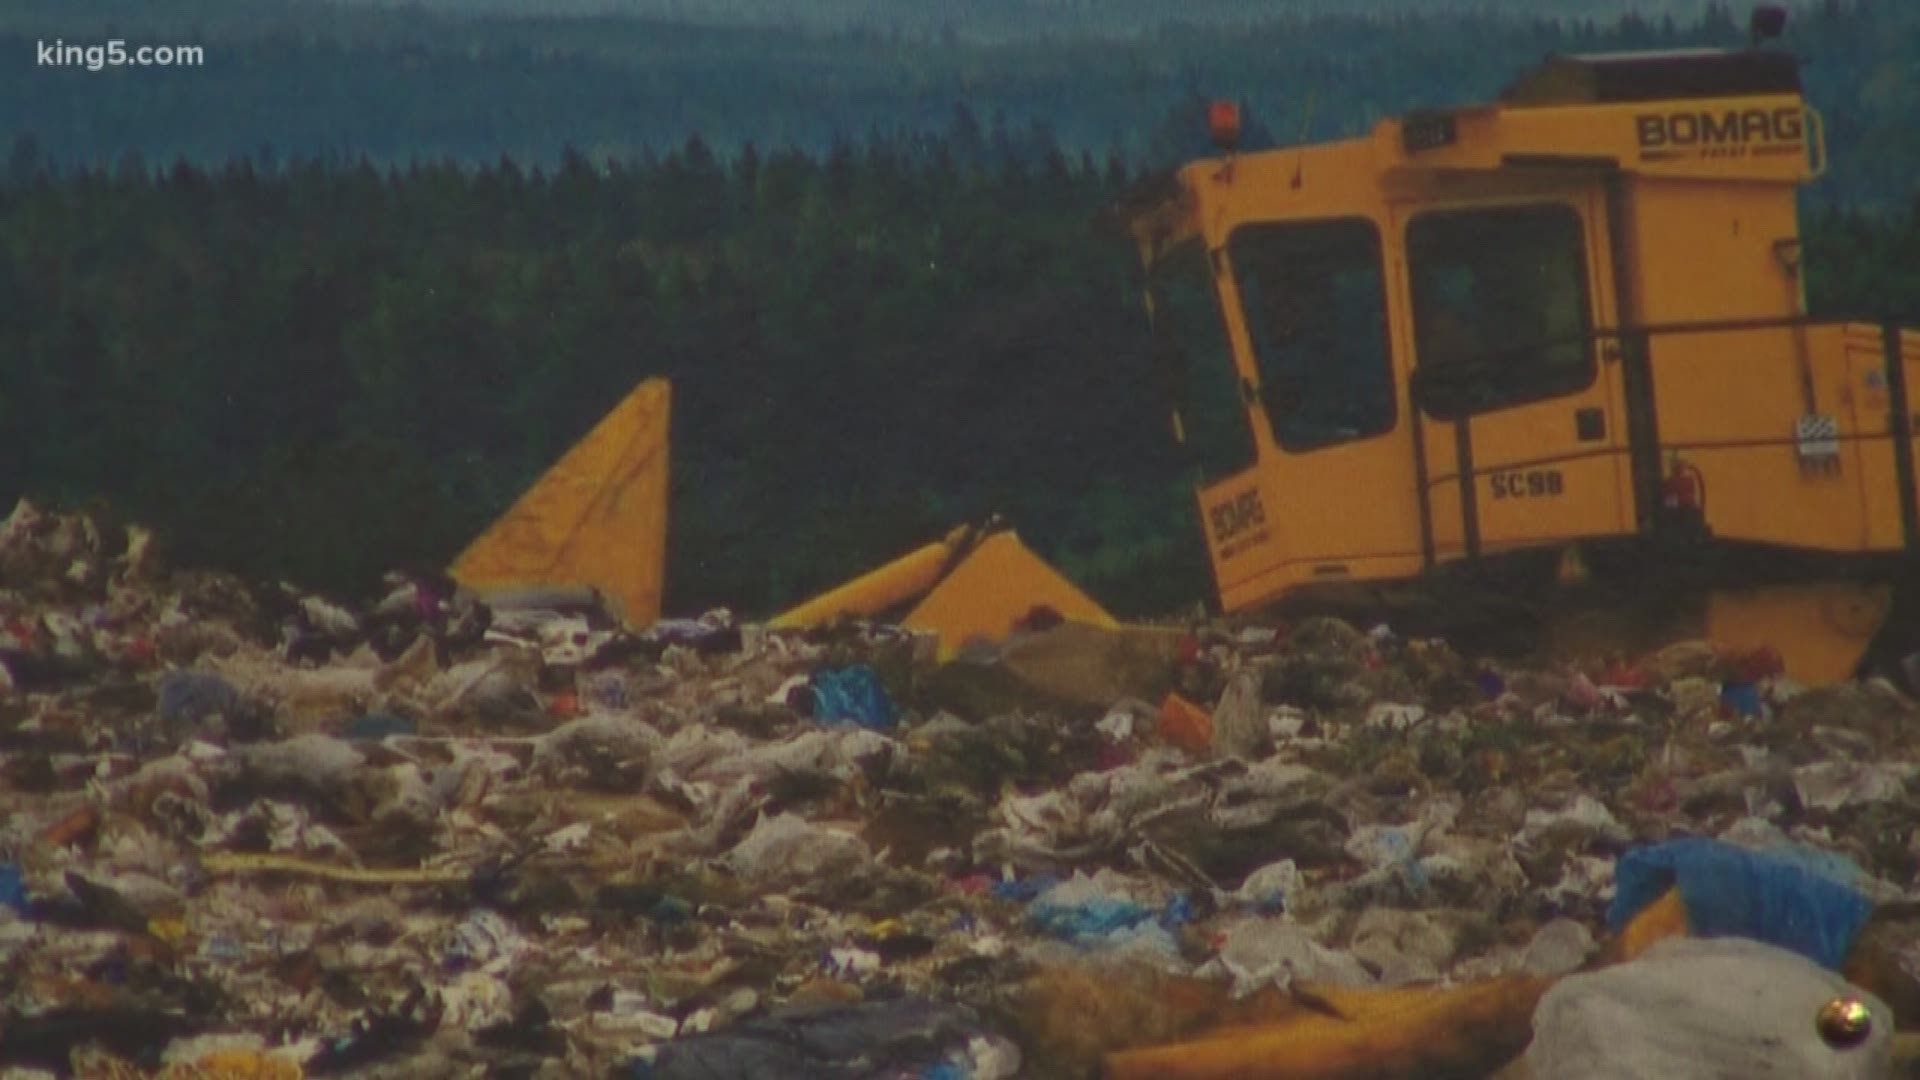 King County's landfill is running out of room, even though it is the size of nearly seven football fields. It serves 37 cities along with unincorporated parts of the county. After operating in the region for five and a half decades, the landfill does not have much space left. KING 5's Natalie Swaby talked with county leaders who are now weighing their options.